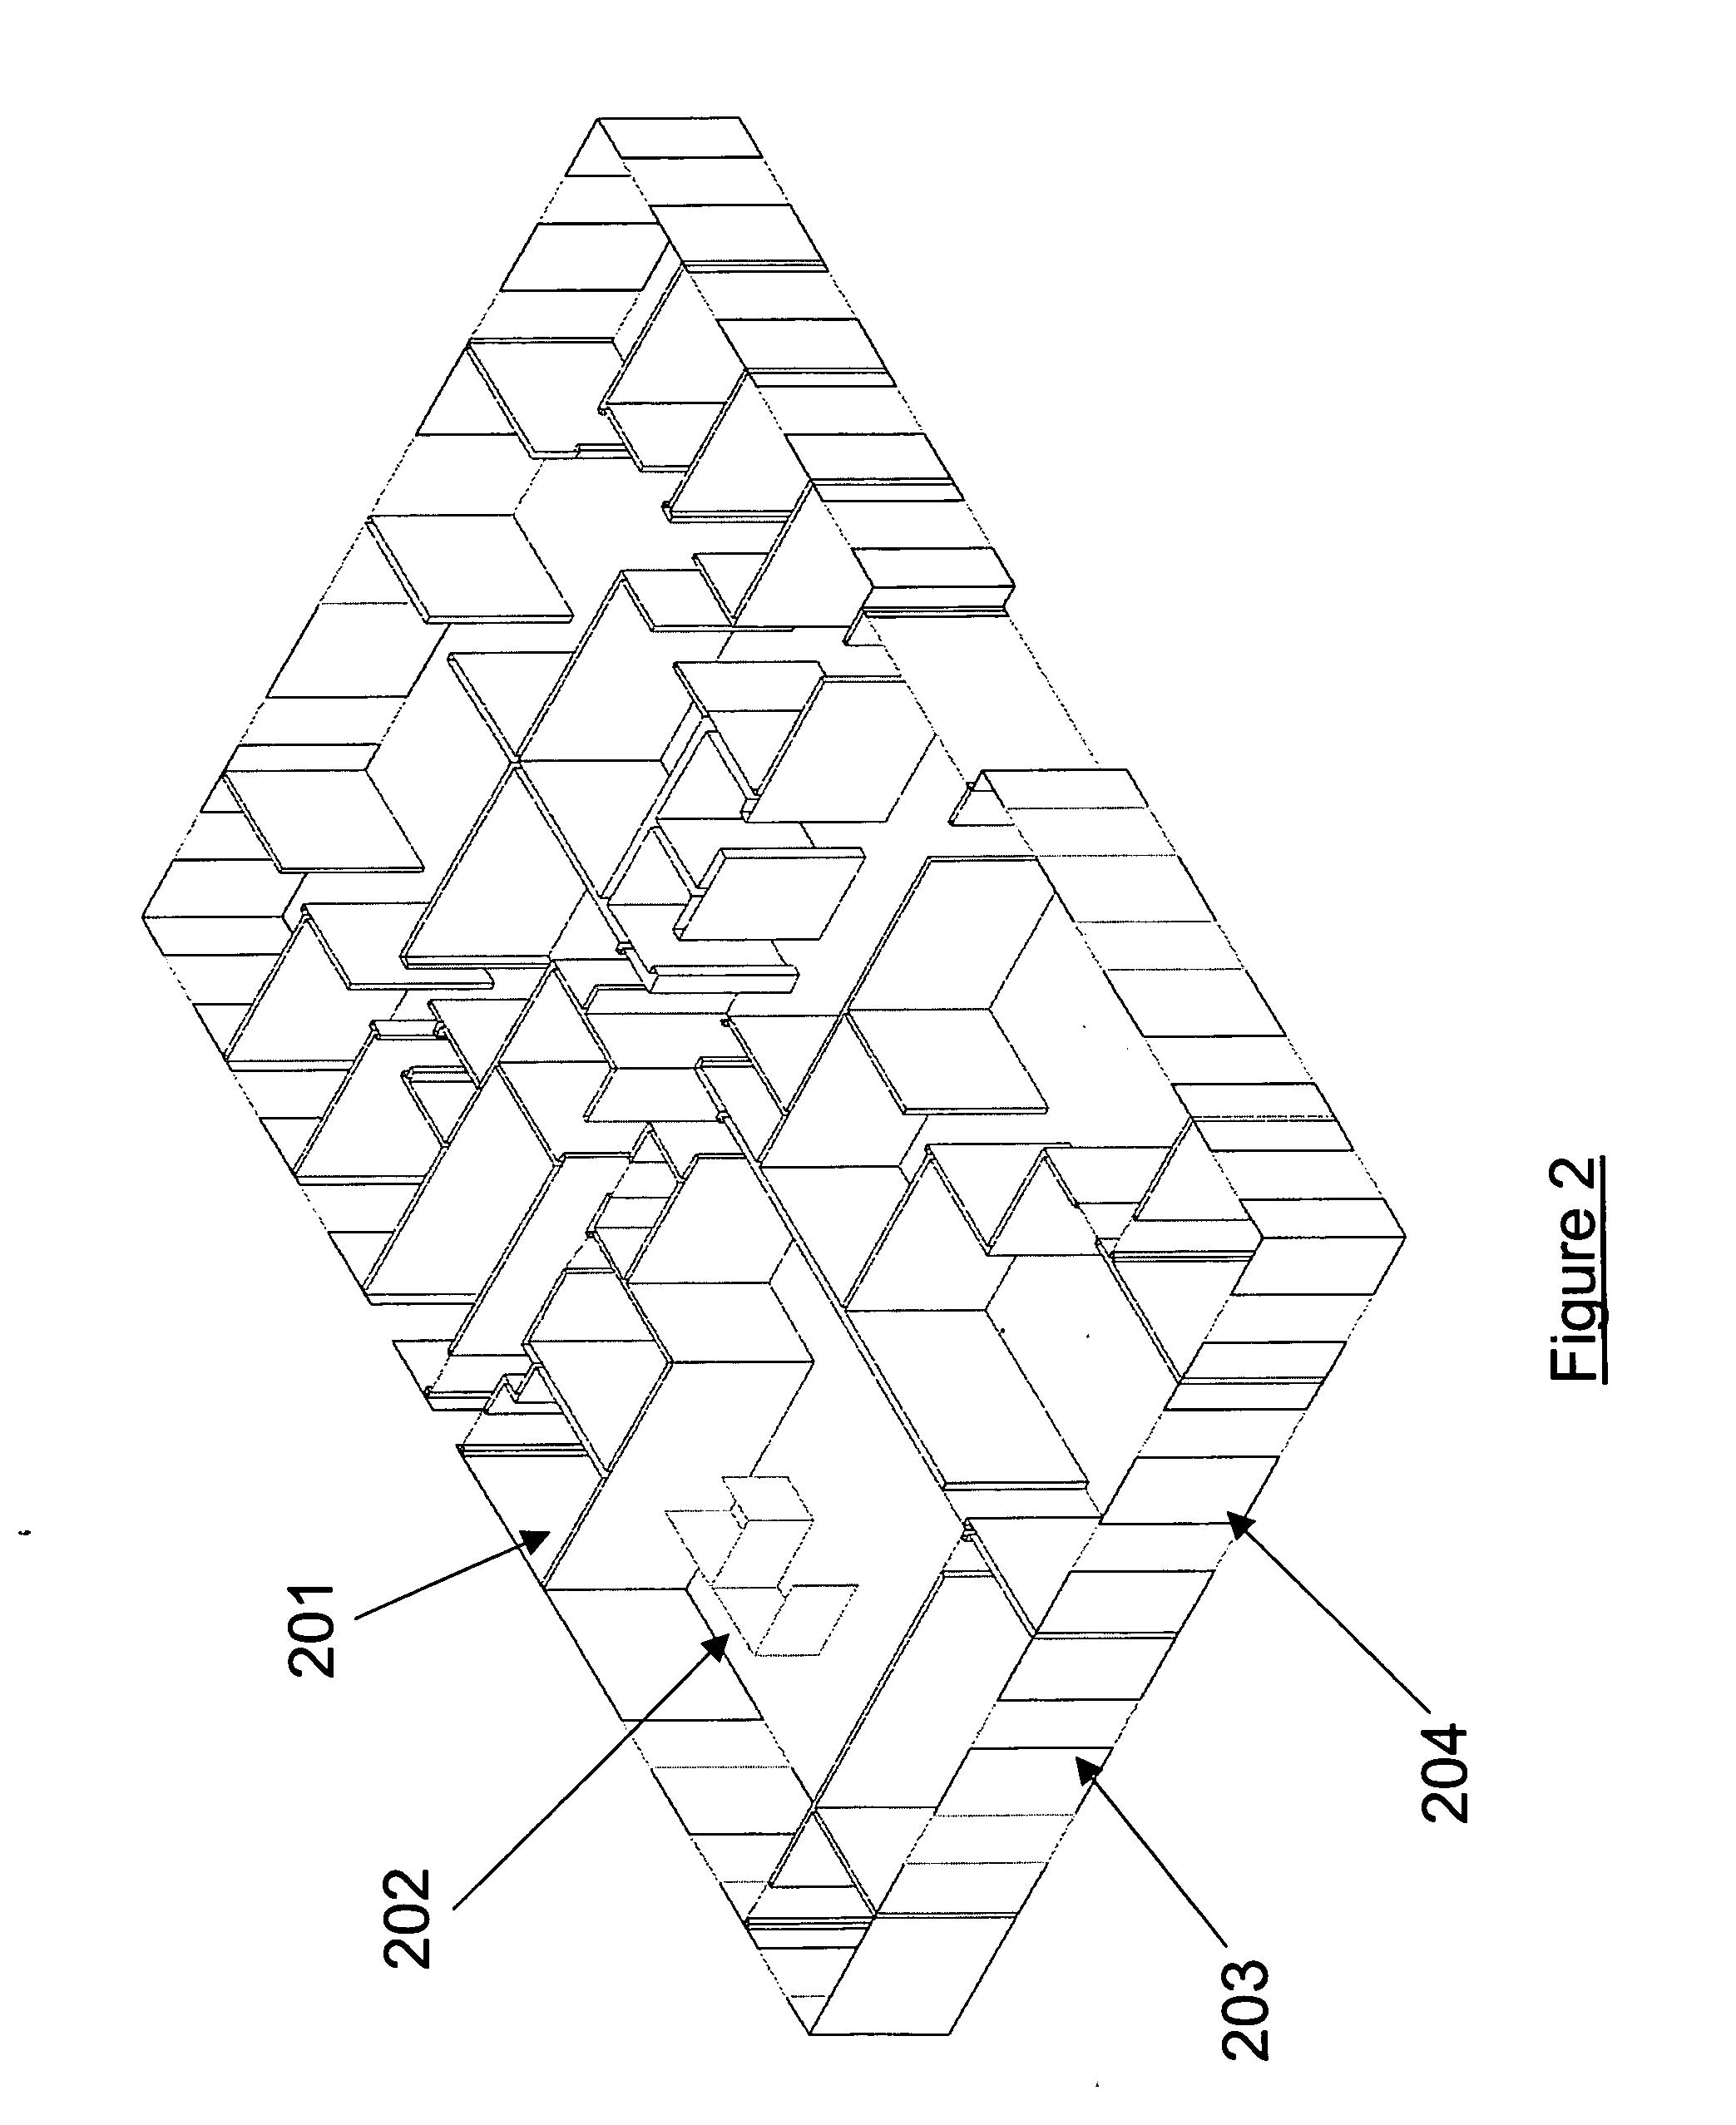 System and method for ray tracing using reception surfaces